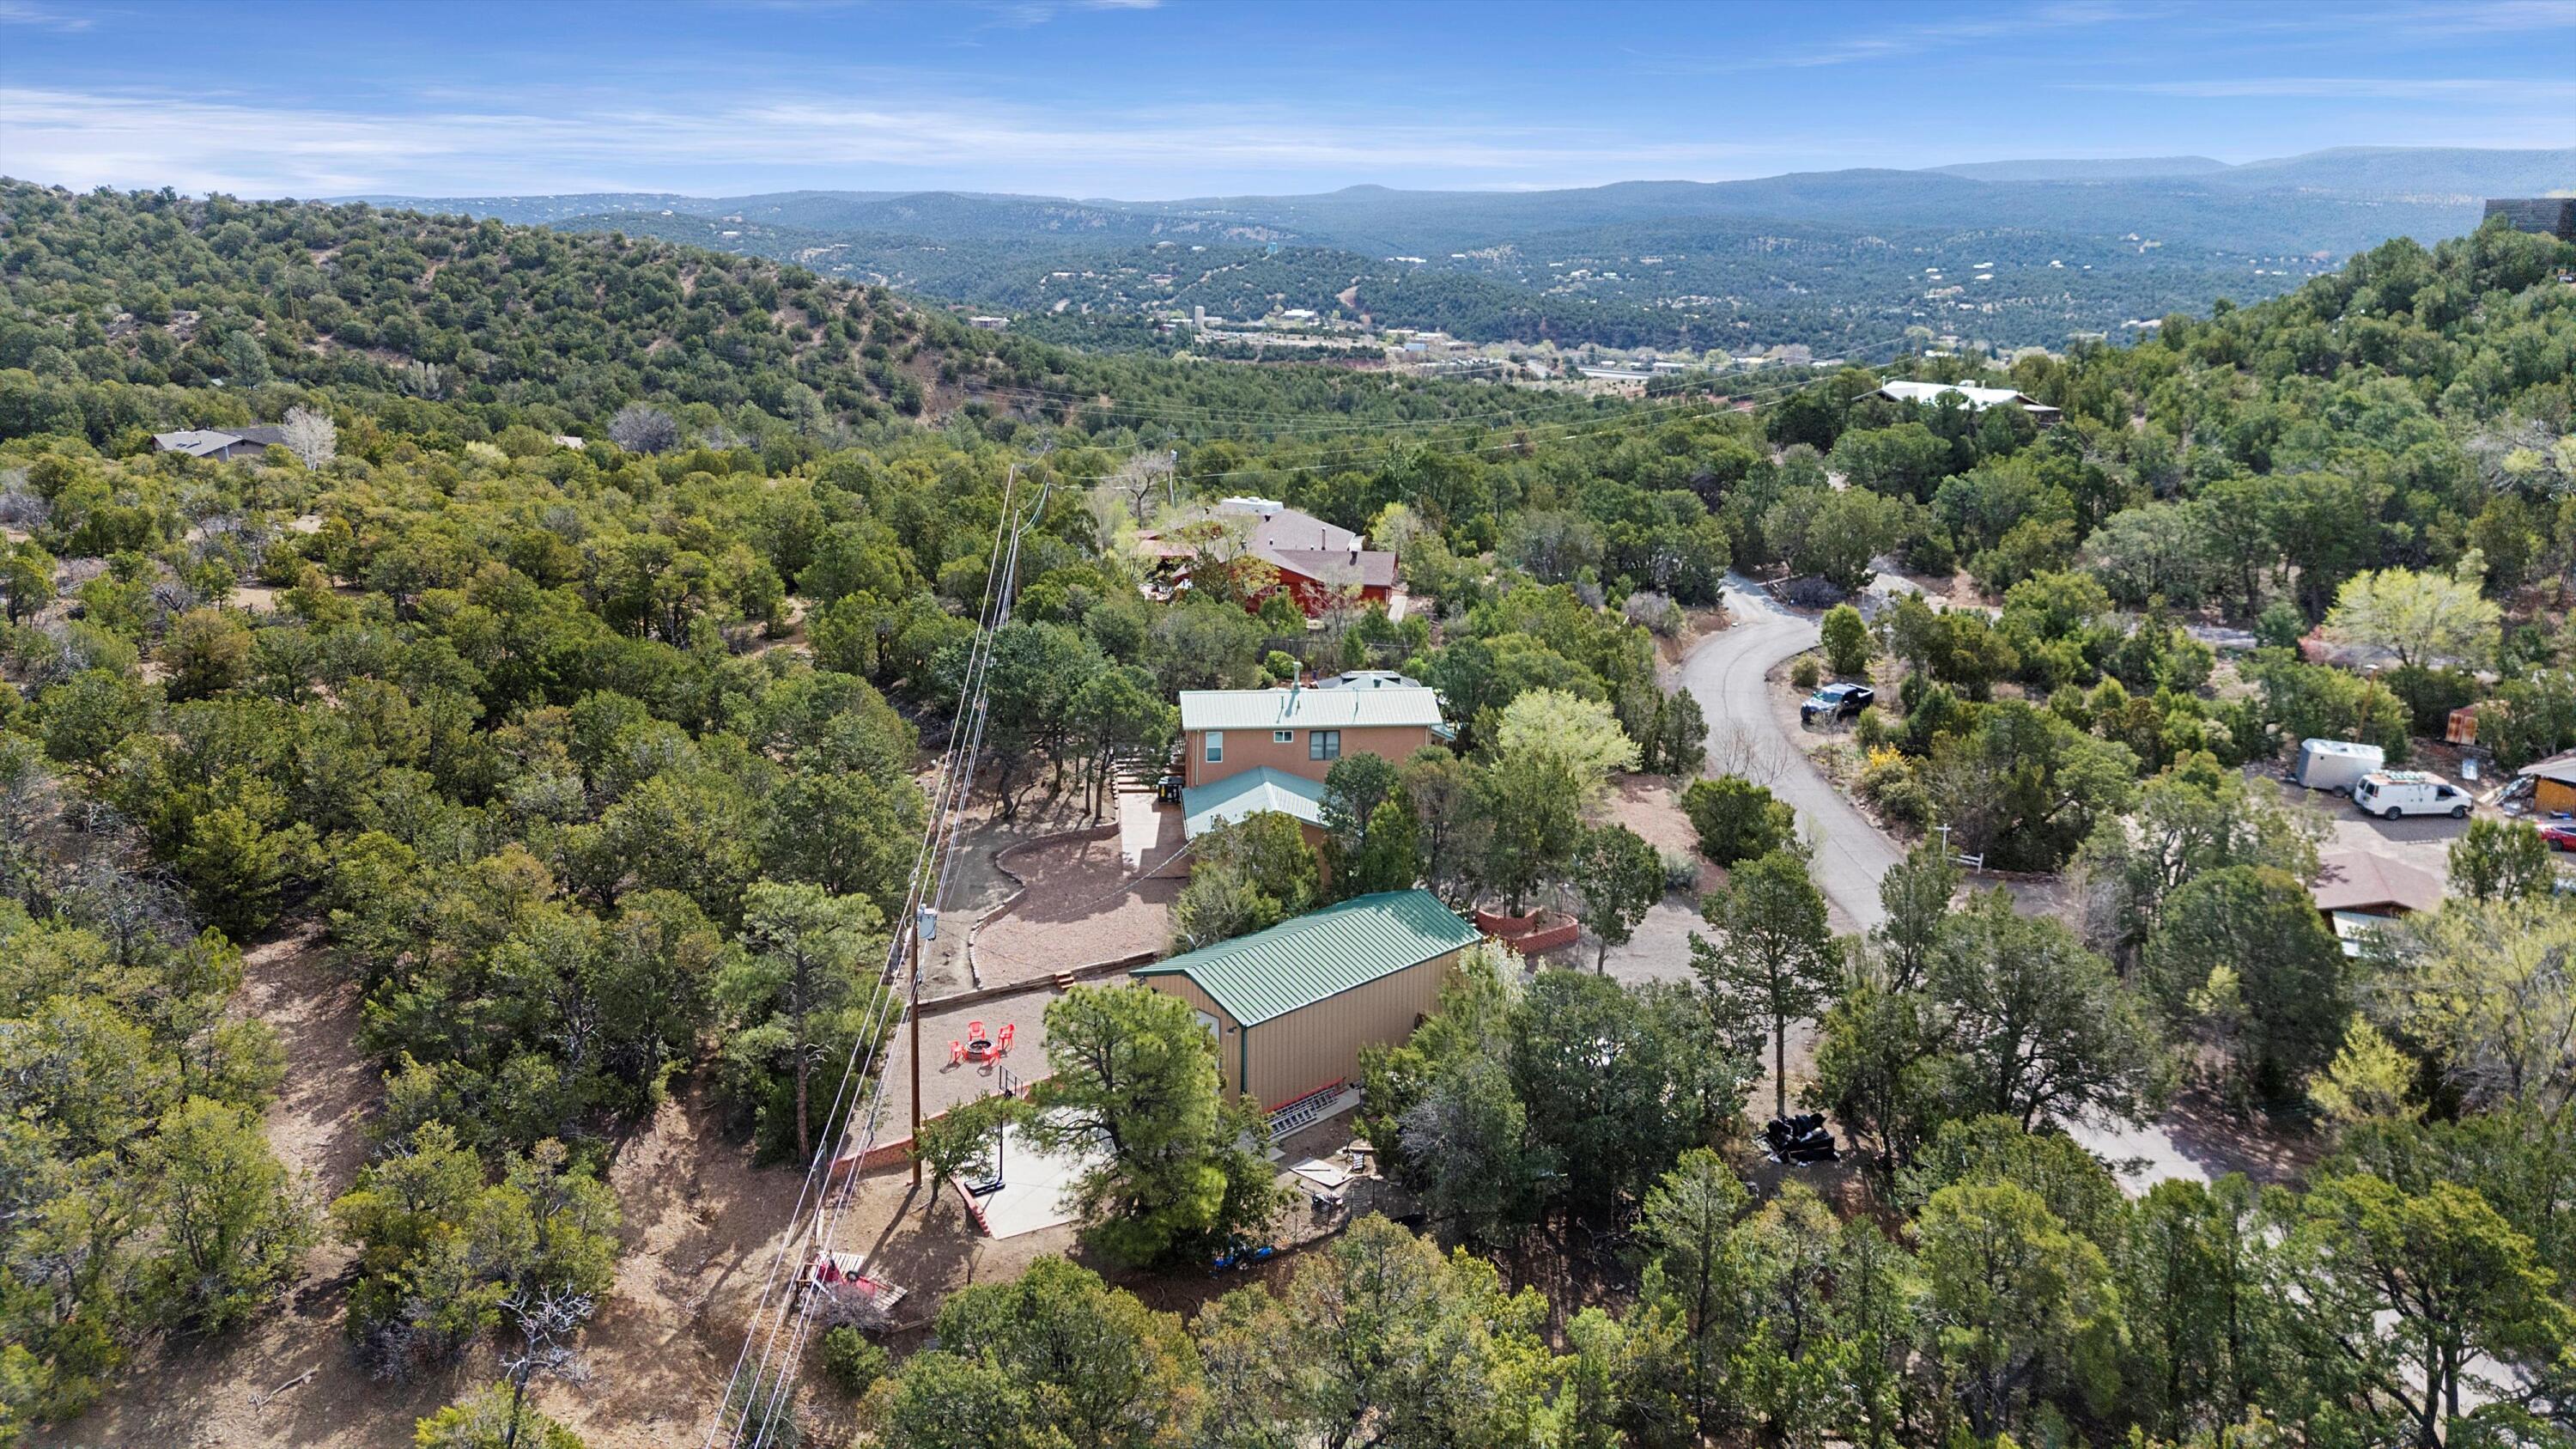 11 Eagle Trail, Tijeras, New Mexico 87059, 4 Bedrooms Bedrooms, ,2 BathroomsBathrooms,Residential,For Sale,11 Eagle Trail,1061257